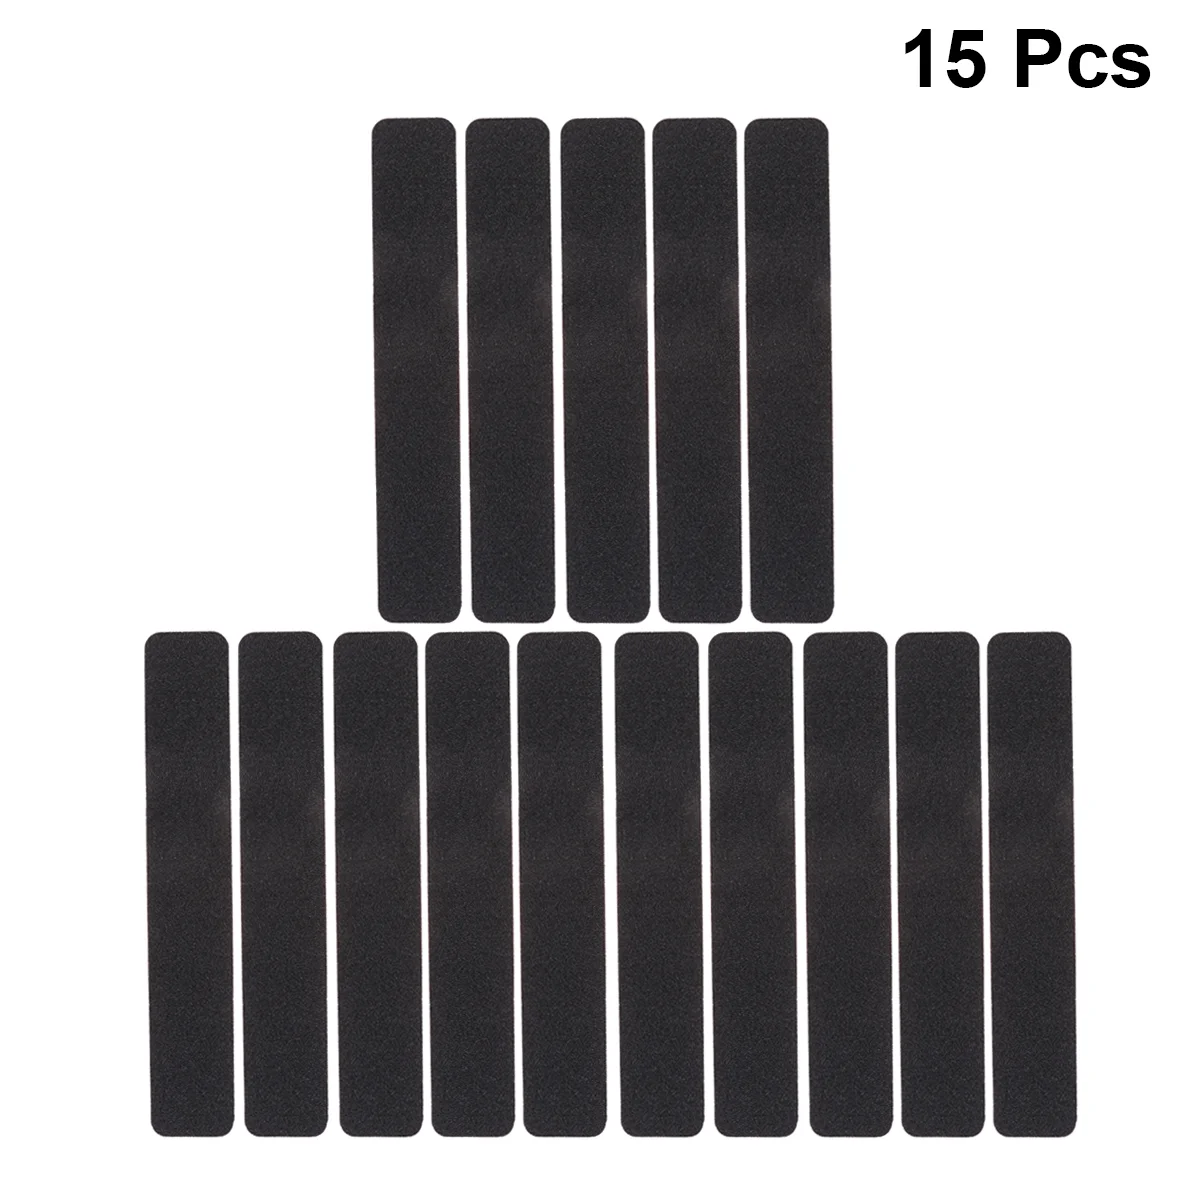 

15 Pcs Anti-slip Tape Adhesive Grip Sticker Electric Black Frosted Friction Anti-skid The